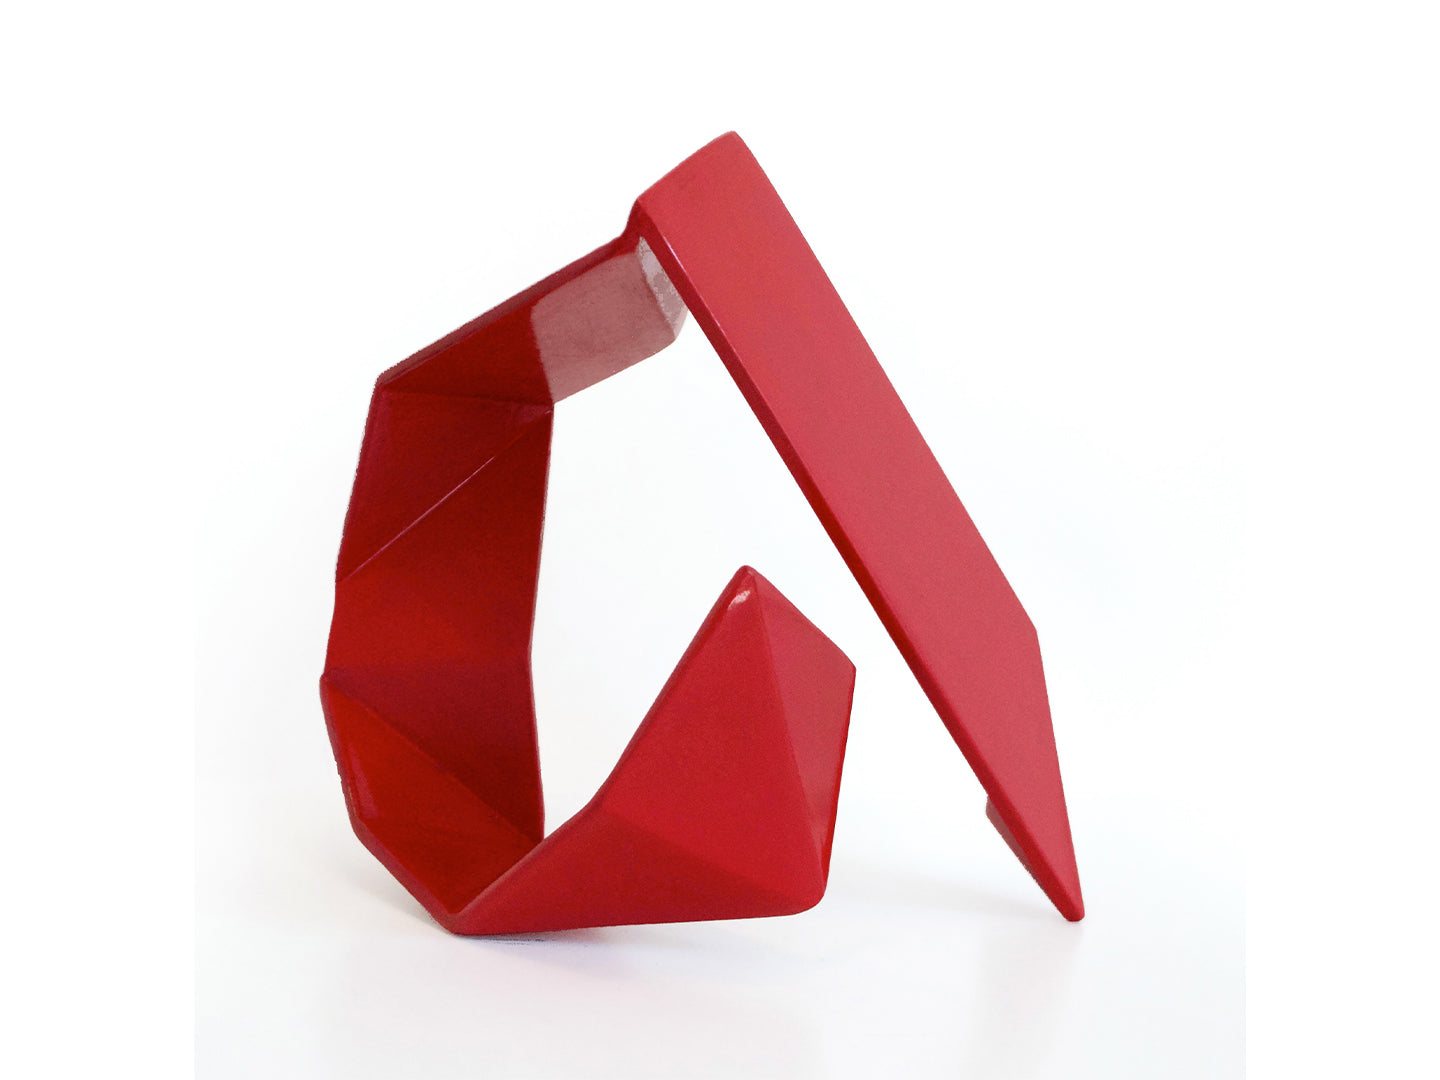 Petits Plis Rouge (Small Red Folds)